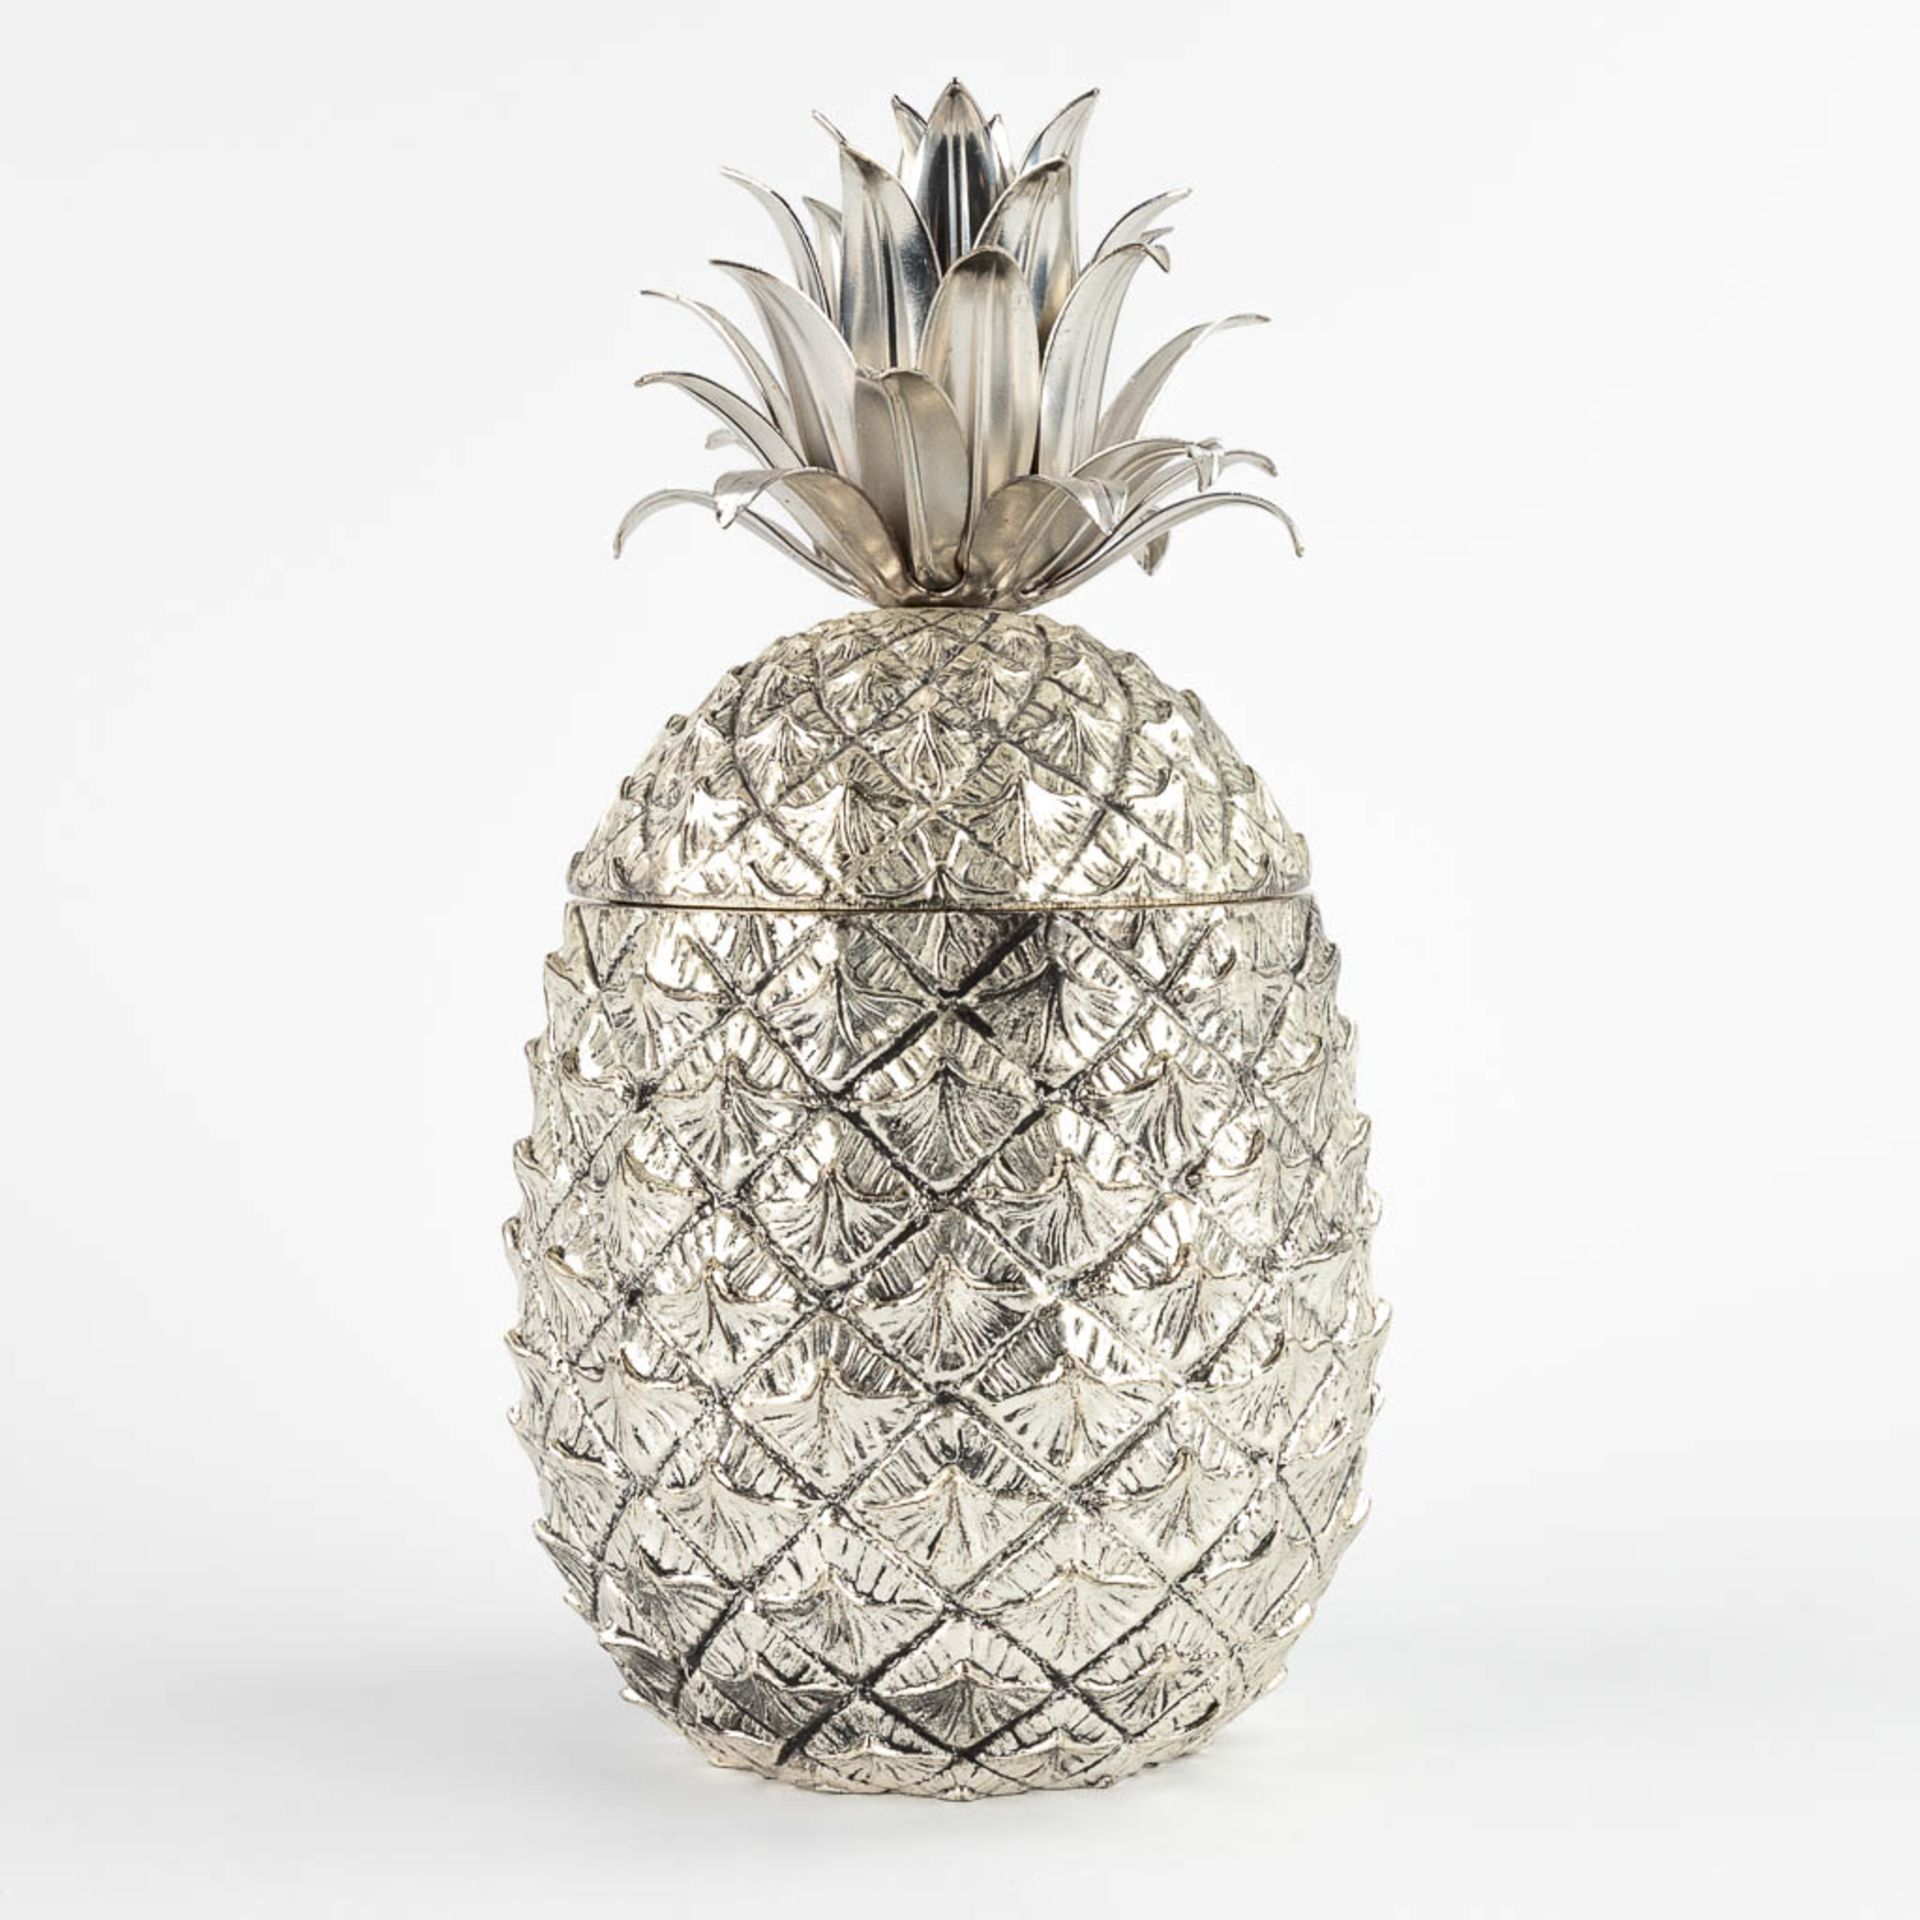 Mauro MANETTI (1946) 'Pineapple' an ice pail. (H:26 x D:14 cm) - Image 8 of 13